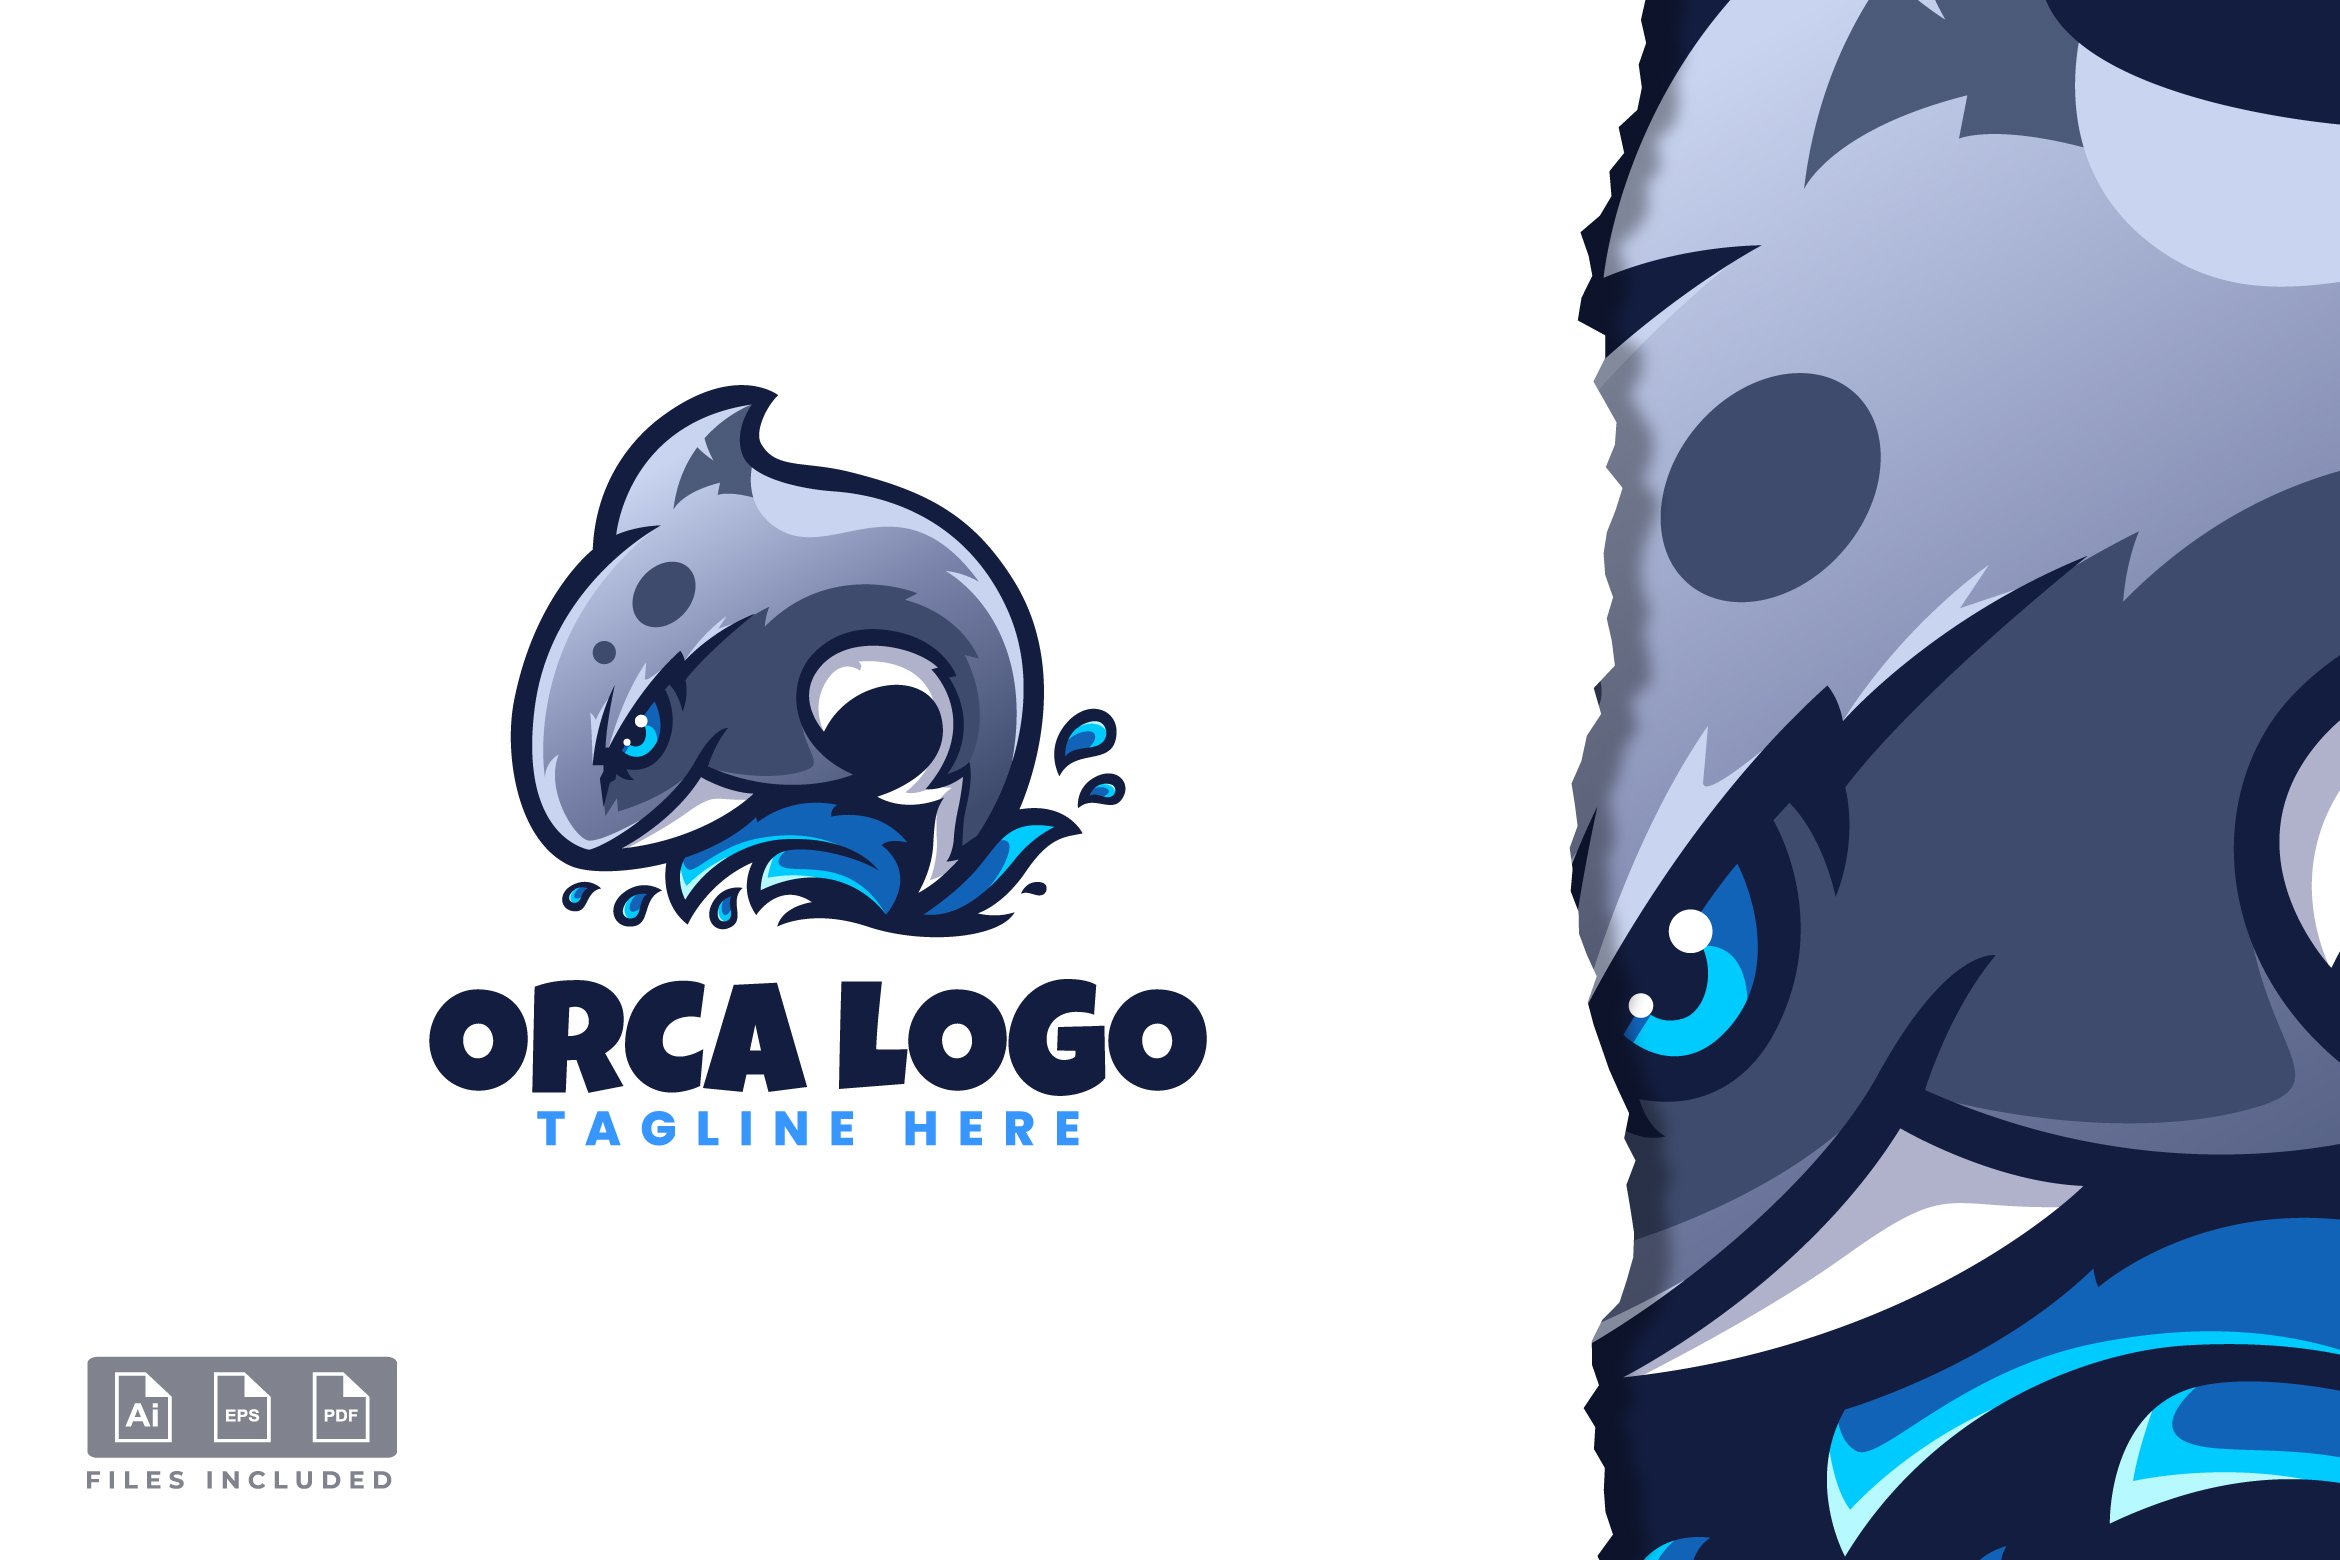 Orca Logo Template cover image.